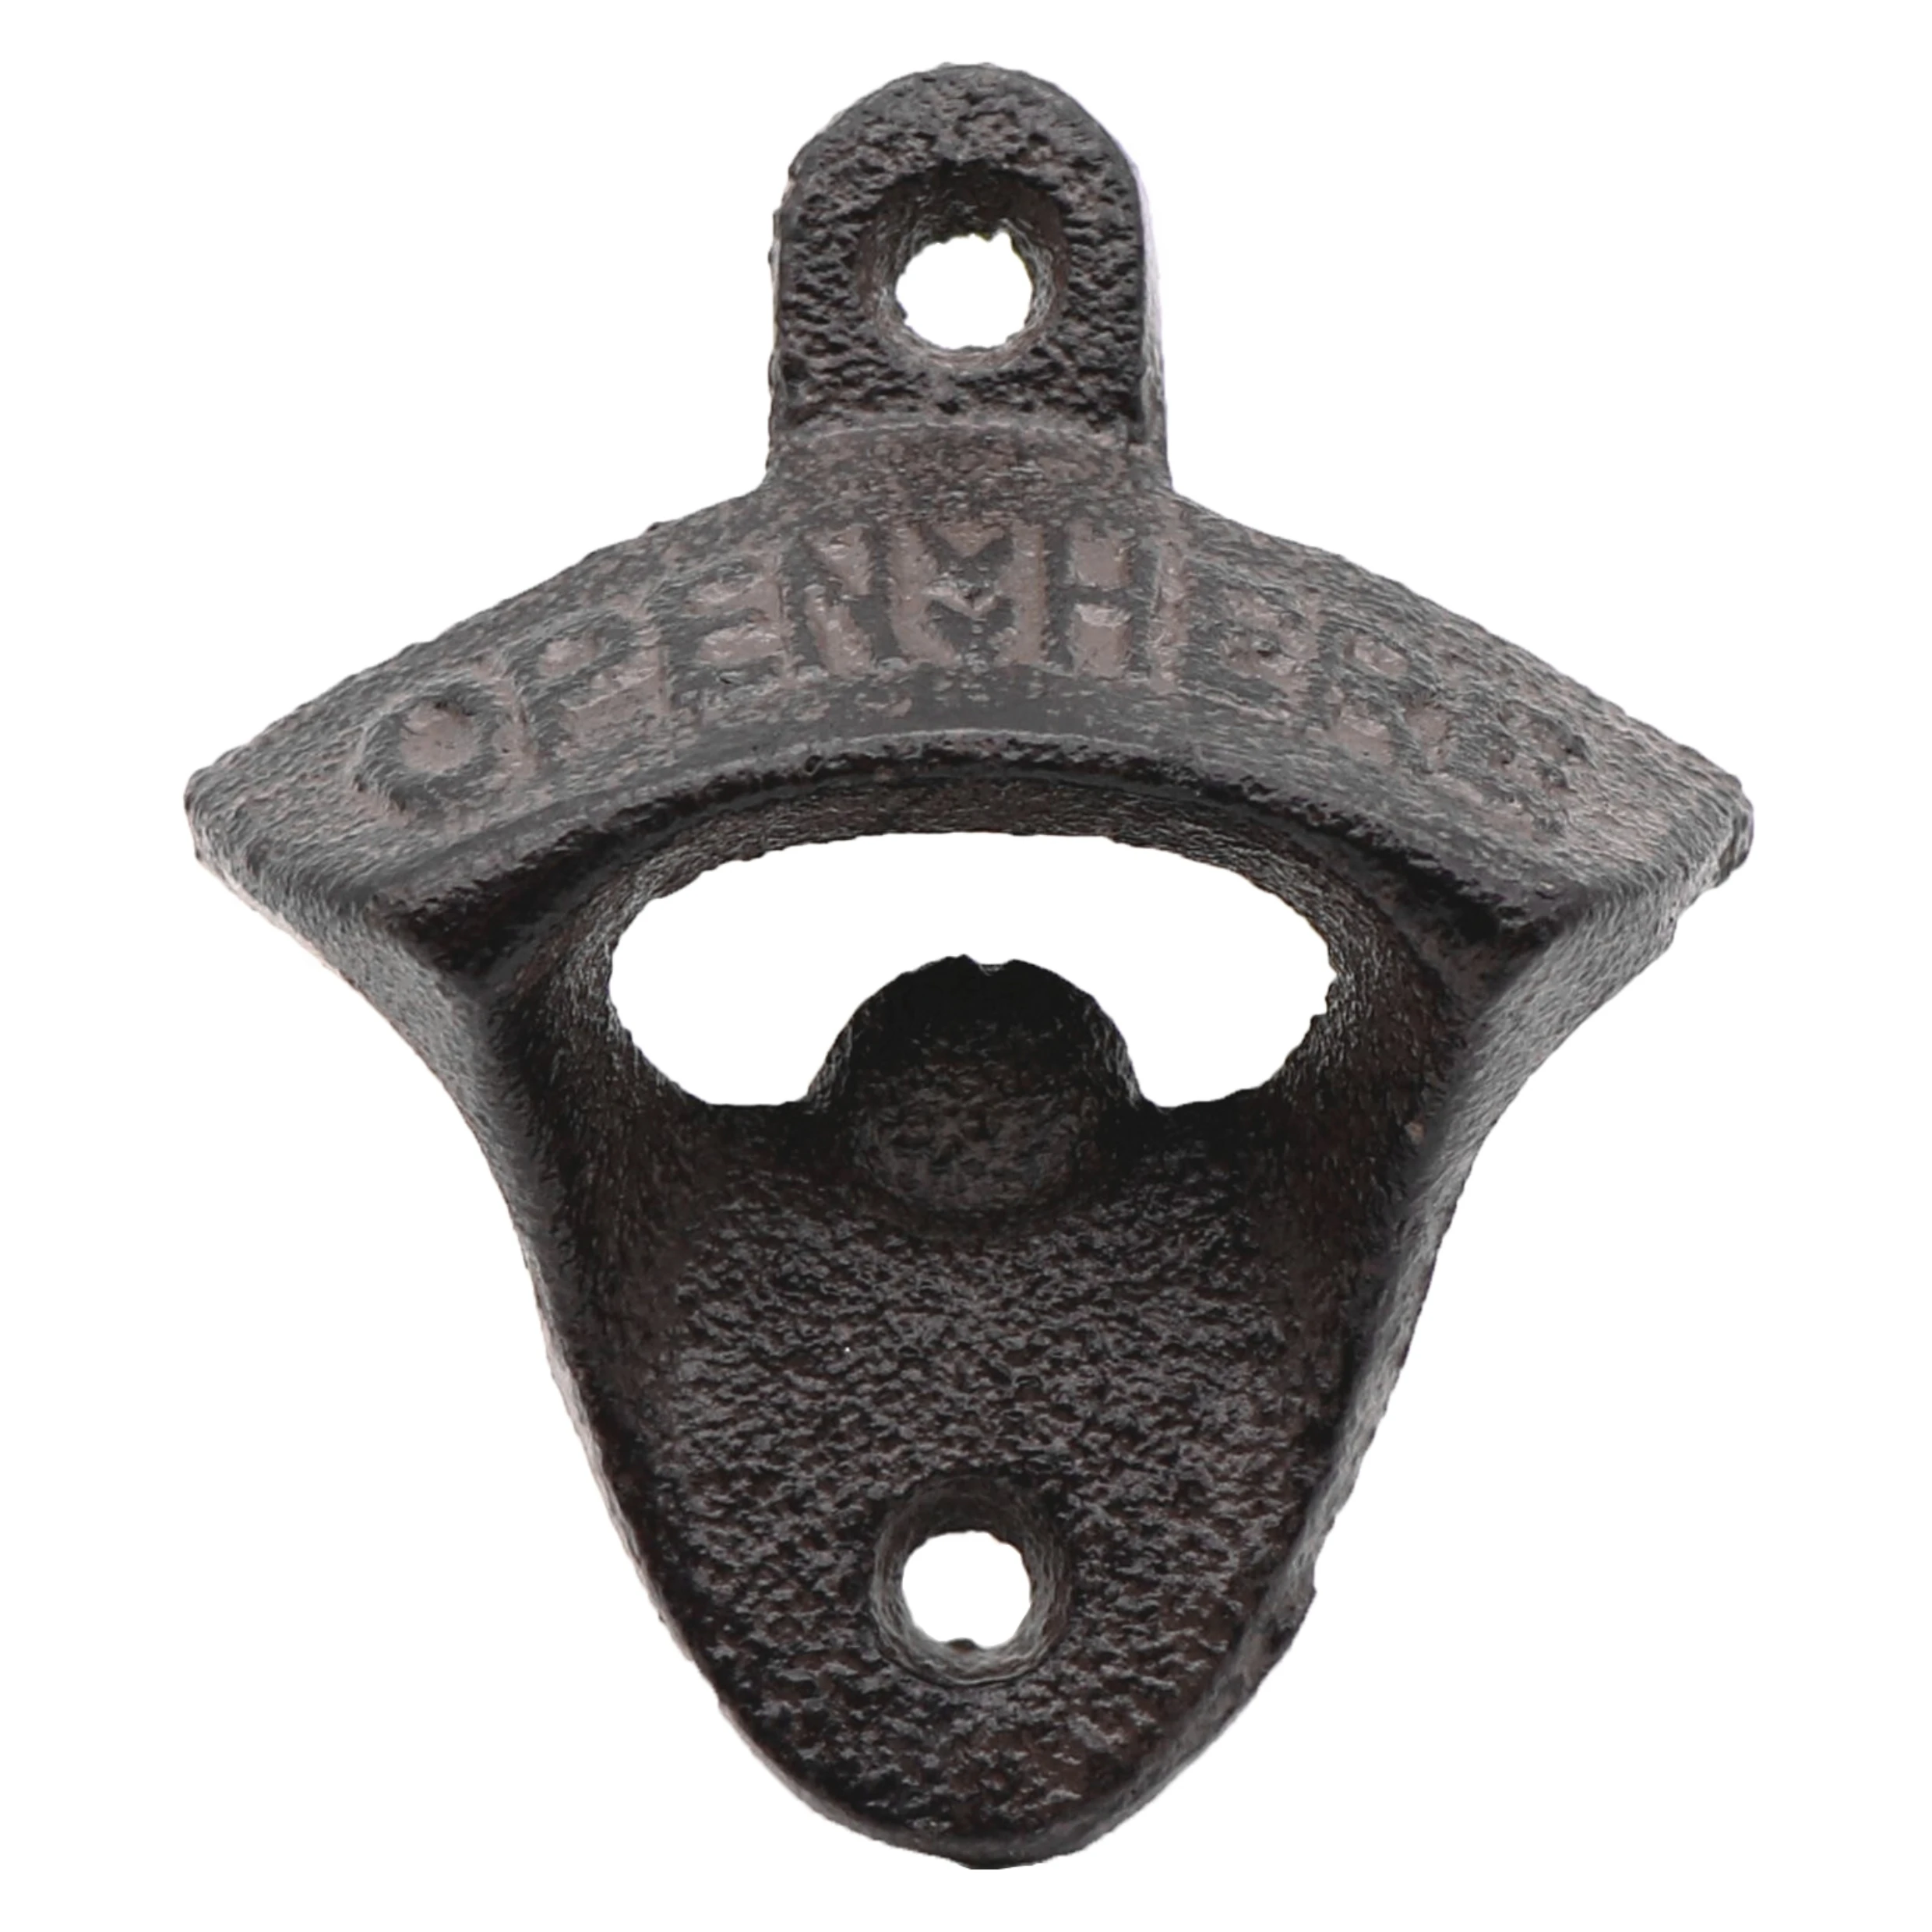 

OPEN HERE Rust Antique Wall Mounted Bottle Opener Cast Iron Crown Stationary Beer Bottle Opener Mounting Screws Included, Dark brown